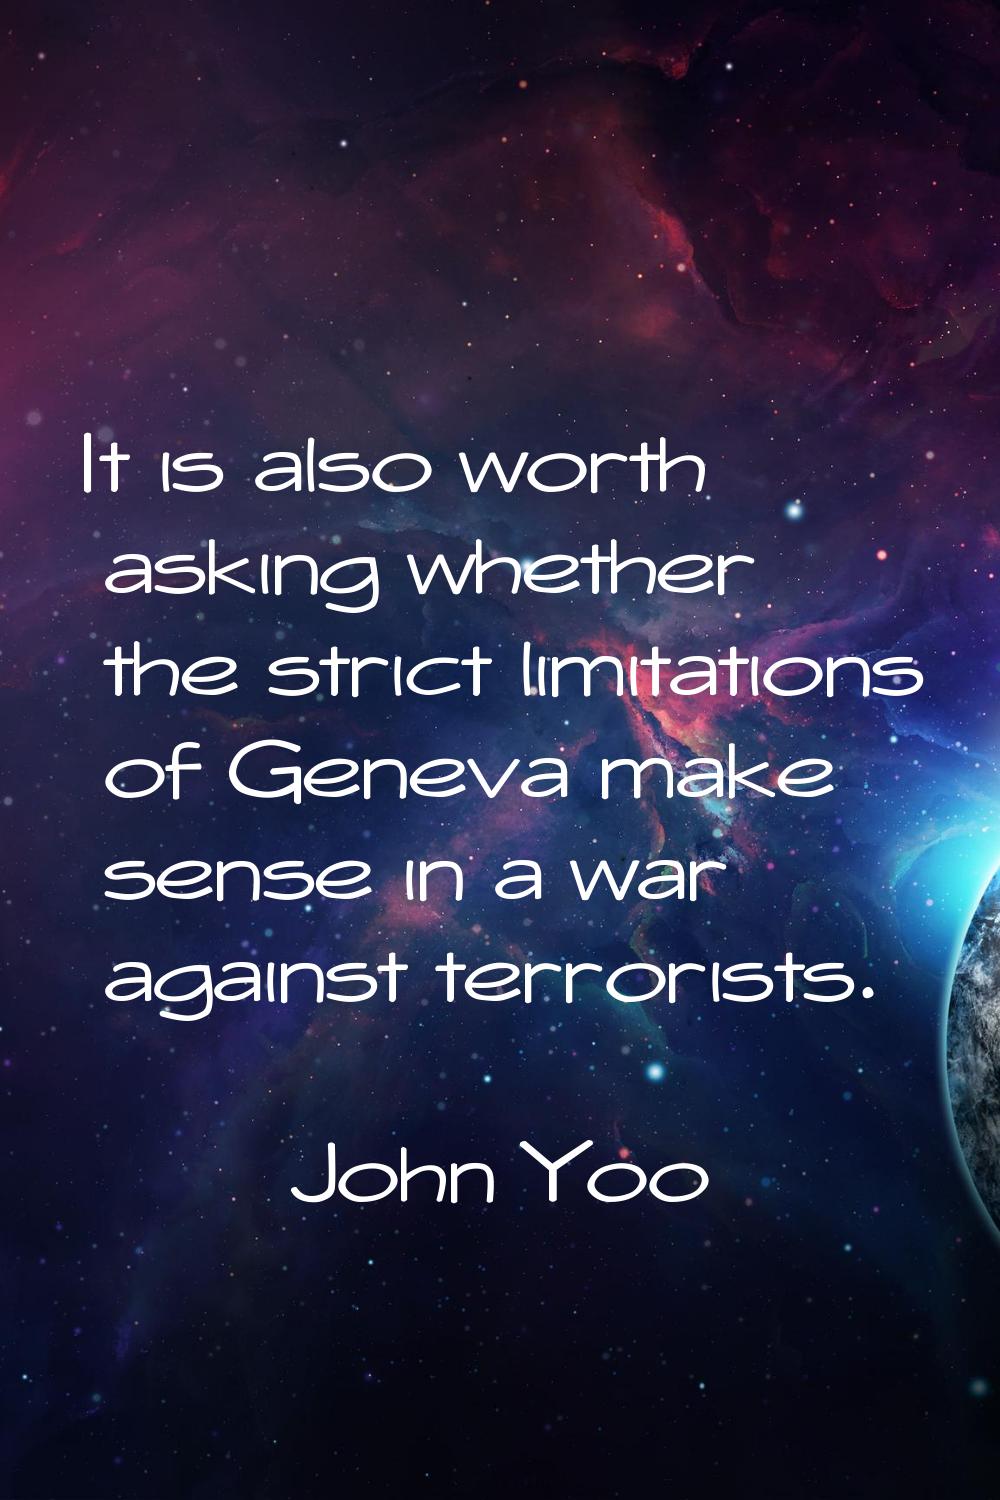 It is also worth asking whether the strict limitations of Geneva make sense in a war against terror